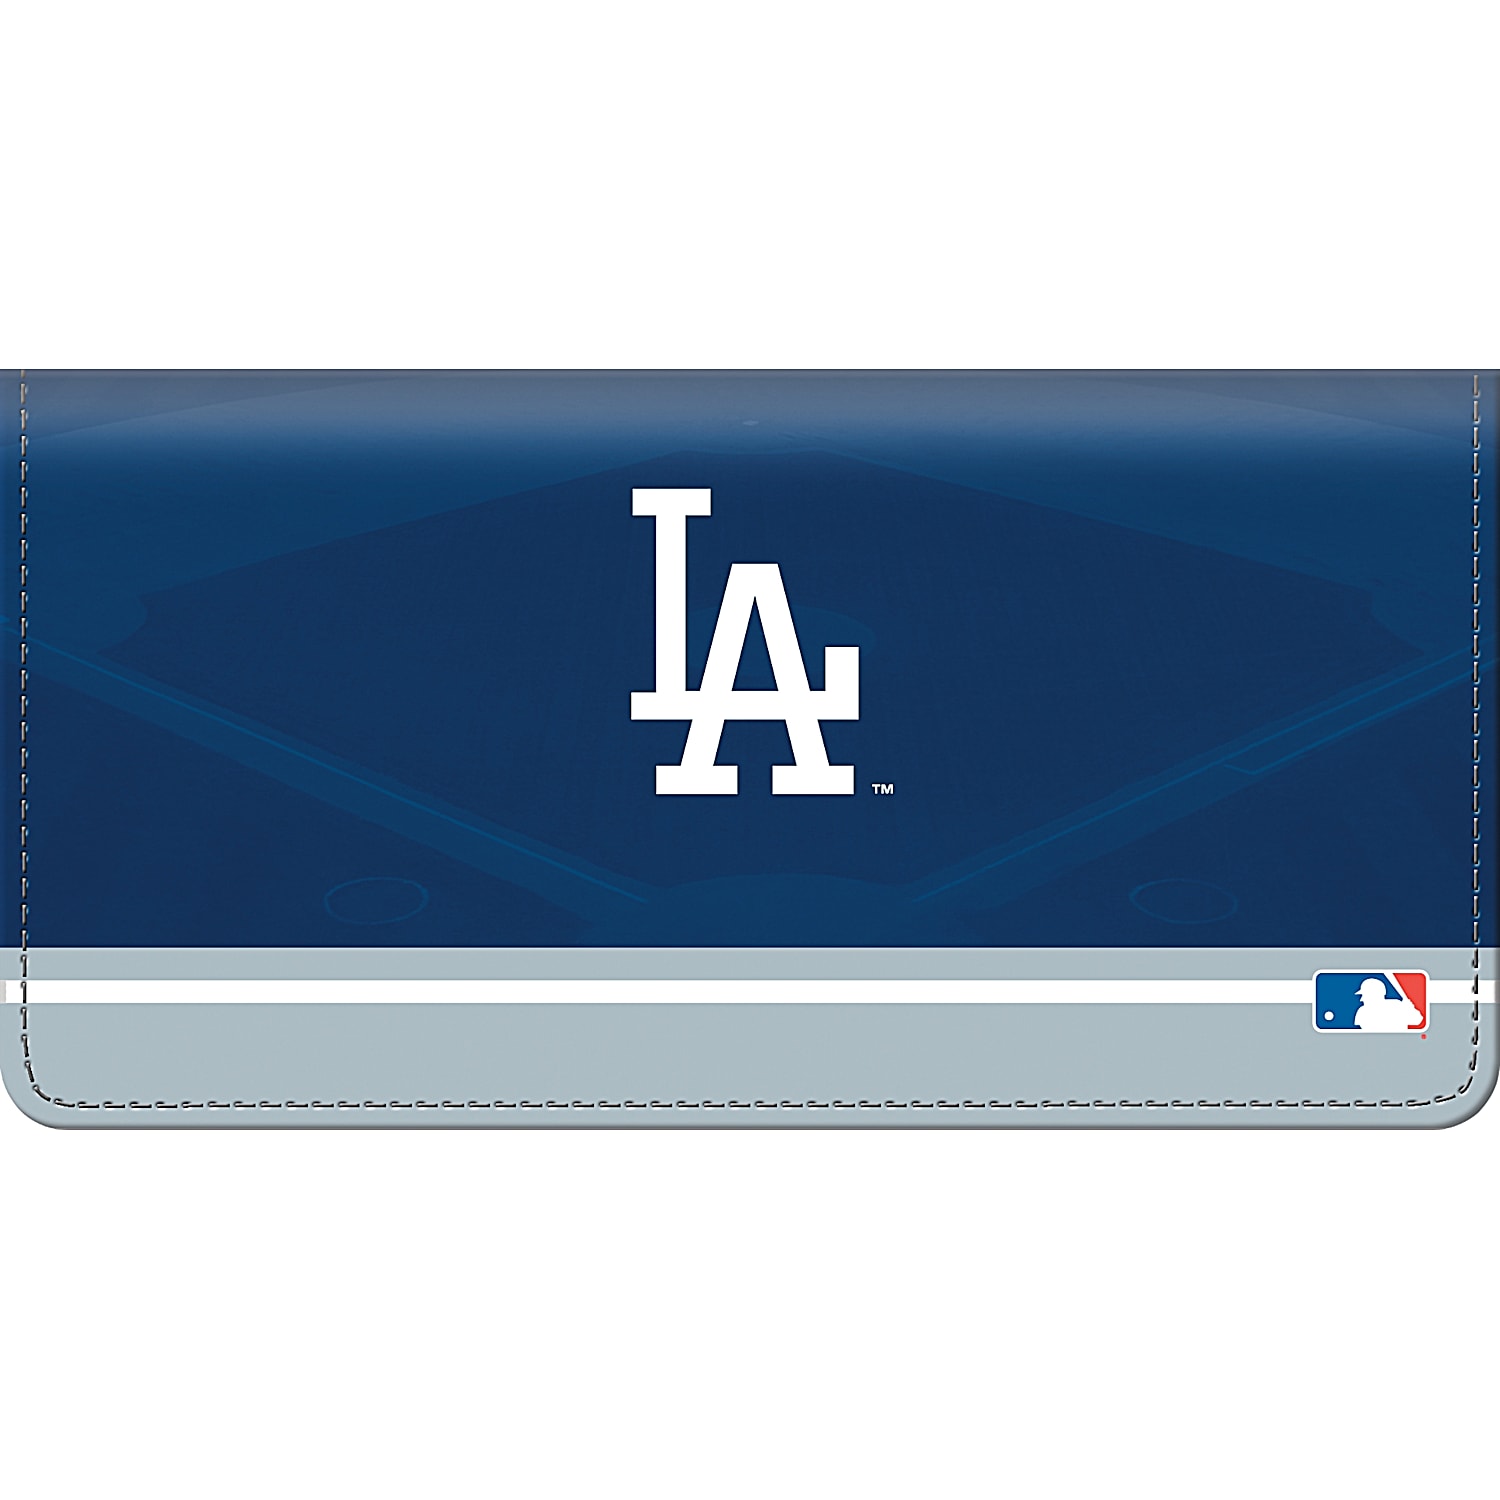 Check out all of the ticket packs - Los Angeles Dodgers